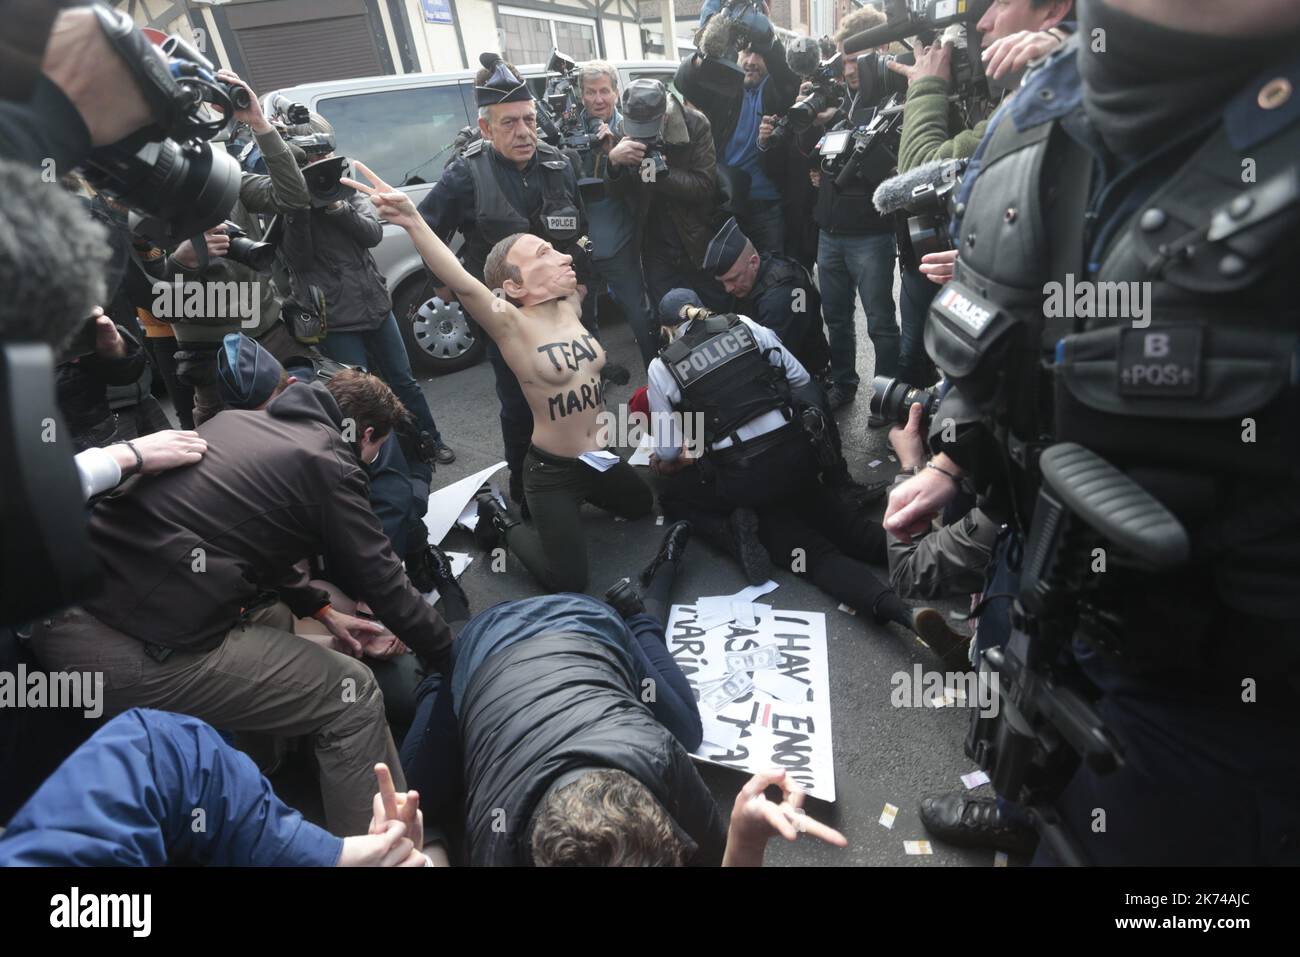 Members of feminist activist group Femen protest against French presidential election candidate for the far-right Front National  party Marine Le Pen outside a polling station in Henin-Beaumont, during the first round of the Presidential election.  Stock Photo